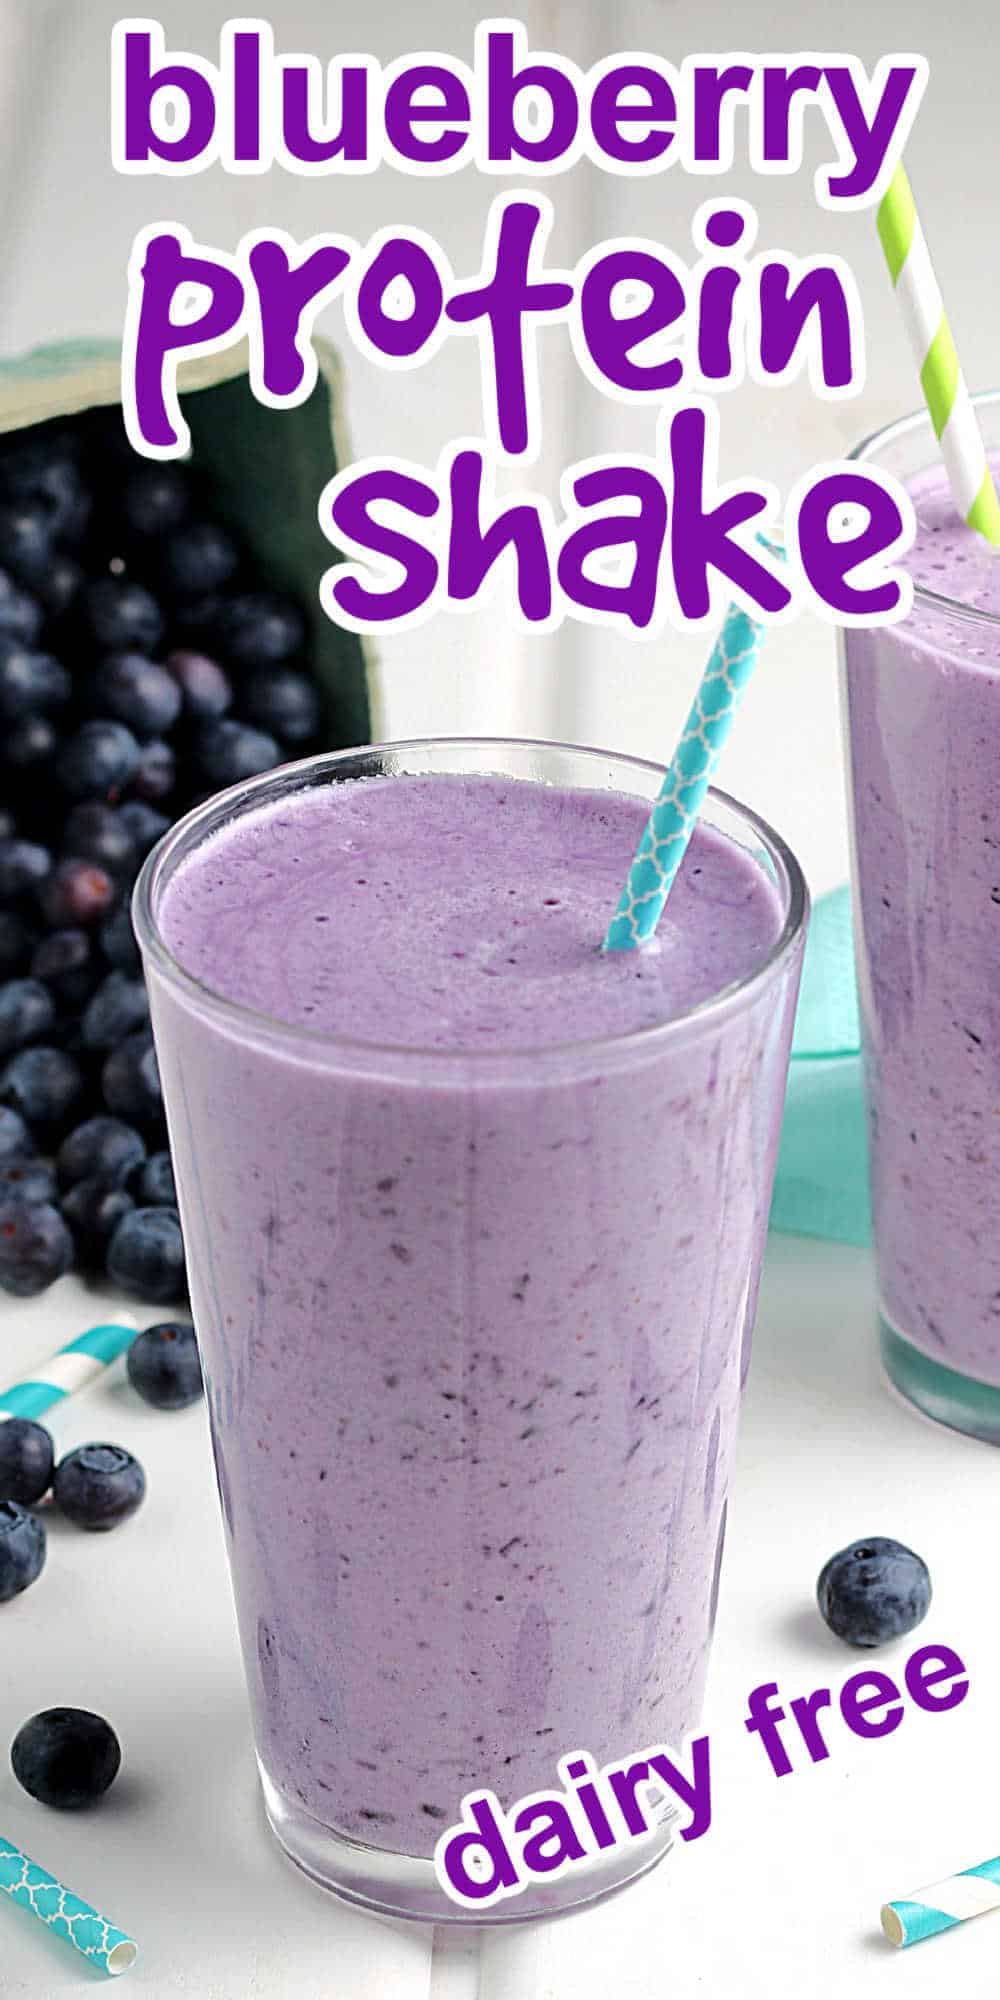 Blueberry Protein Shake Before or After Workout - Vegan